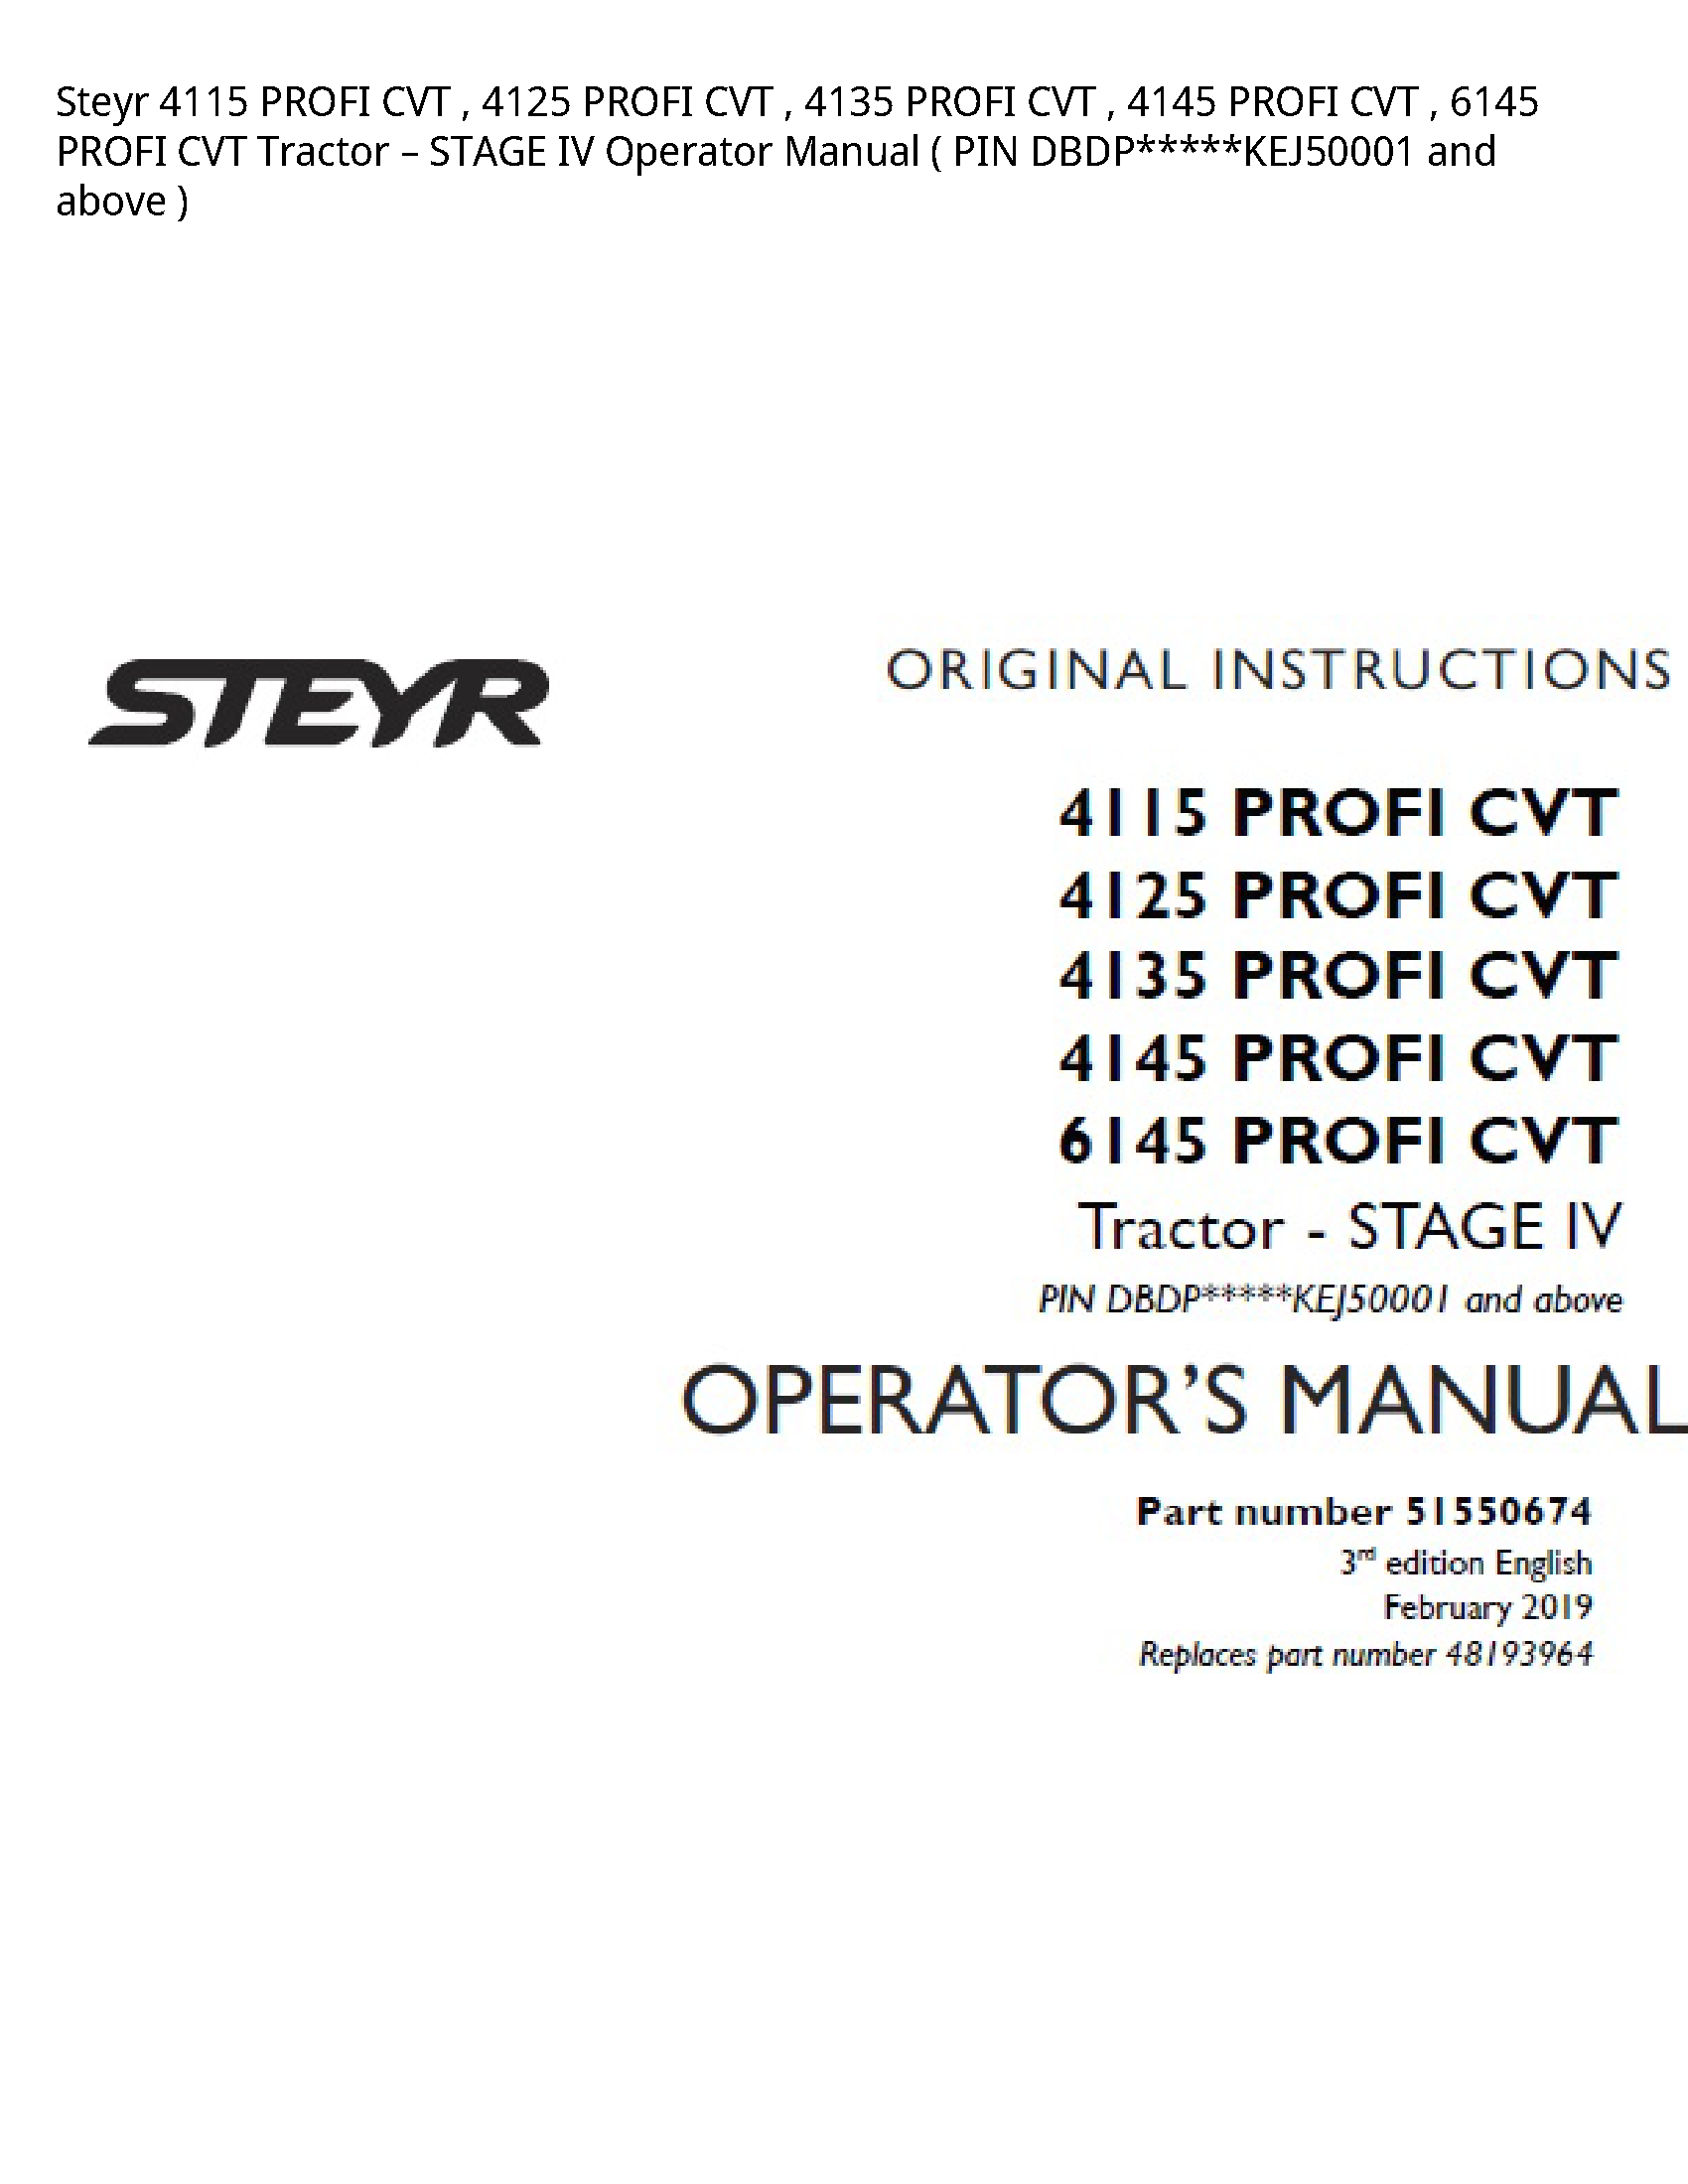 Steyr 4115 PROFI CVT PROFI CVT PROFI CVT PROFI CVT PROFI CVT Tractor STAGE IV Operator manual